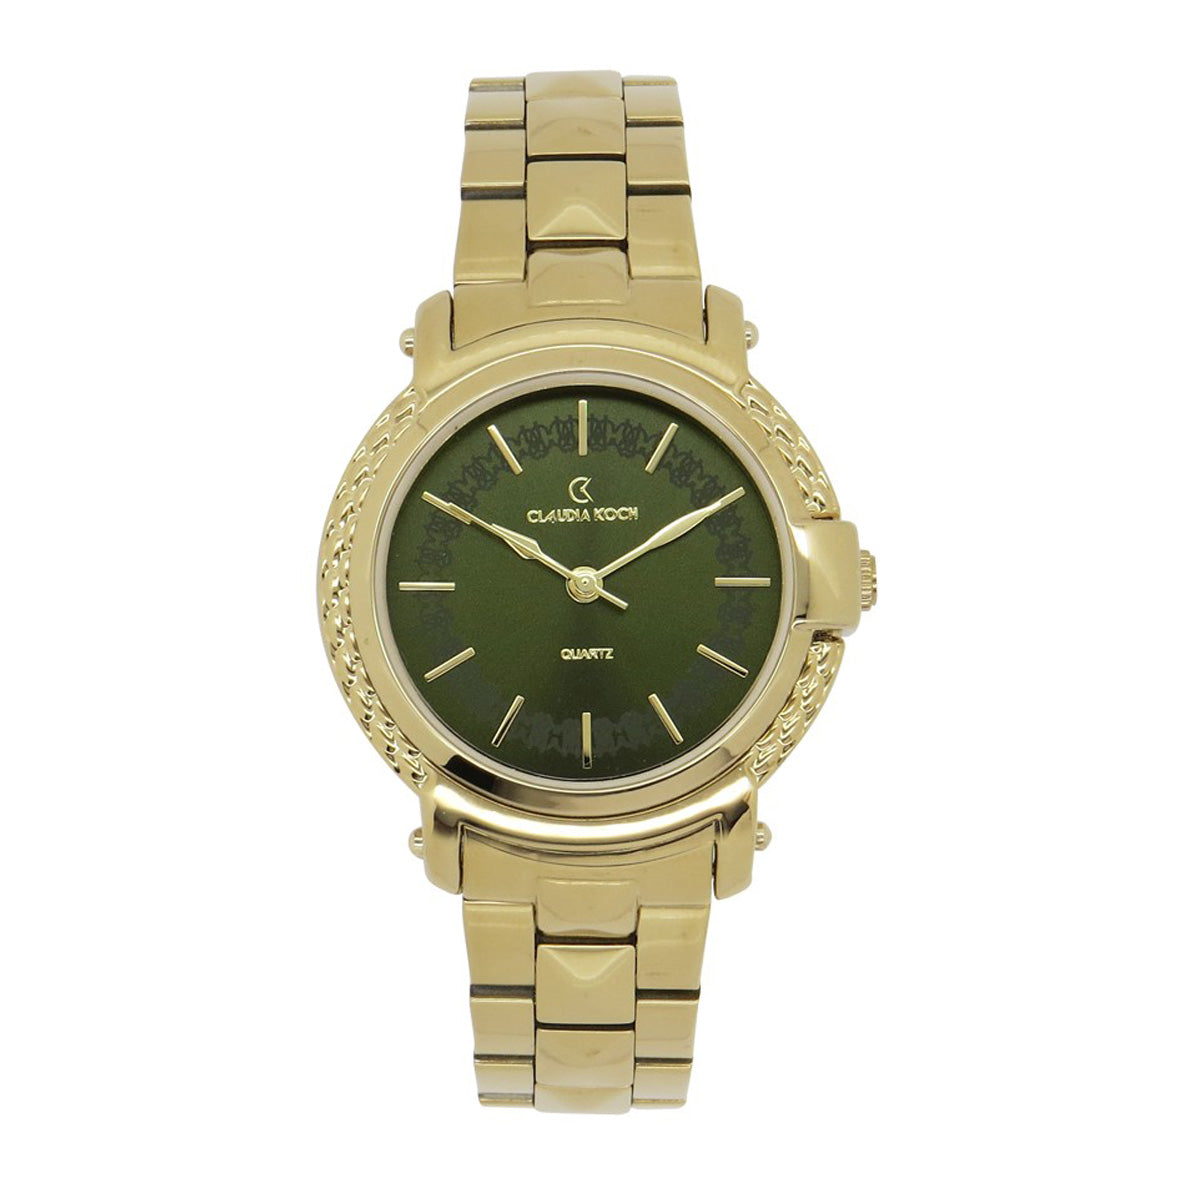 Stainless Steel Analog special face classy Women watch